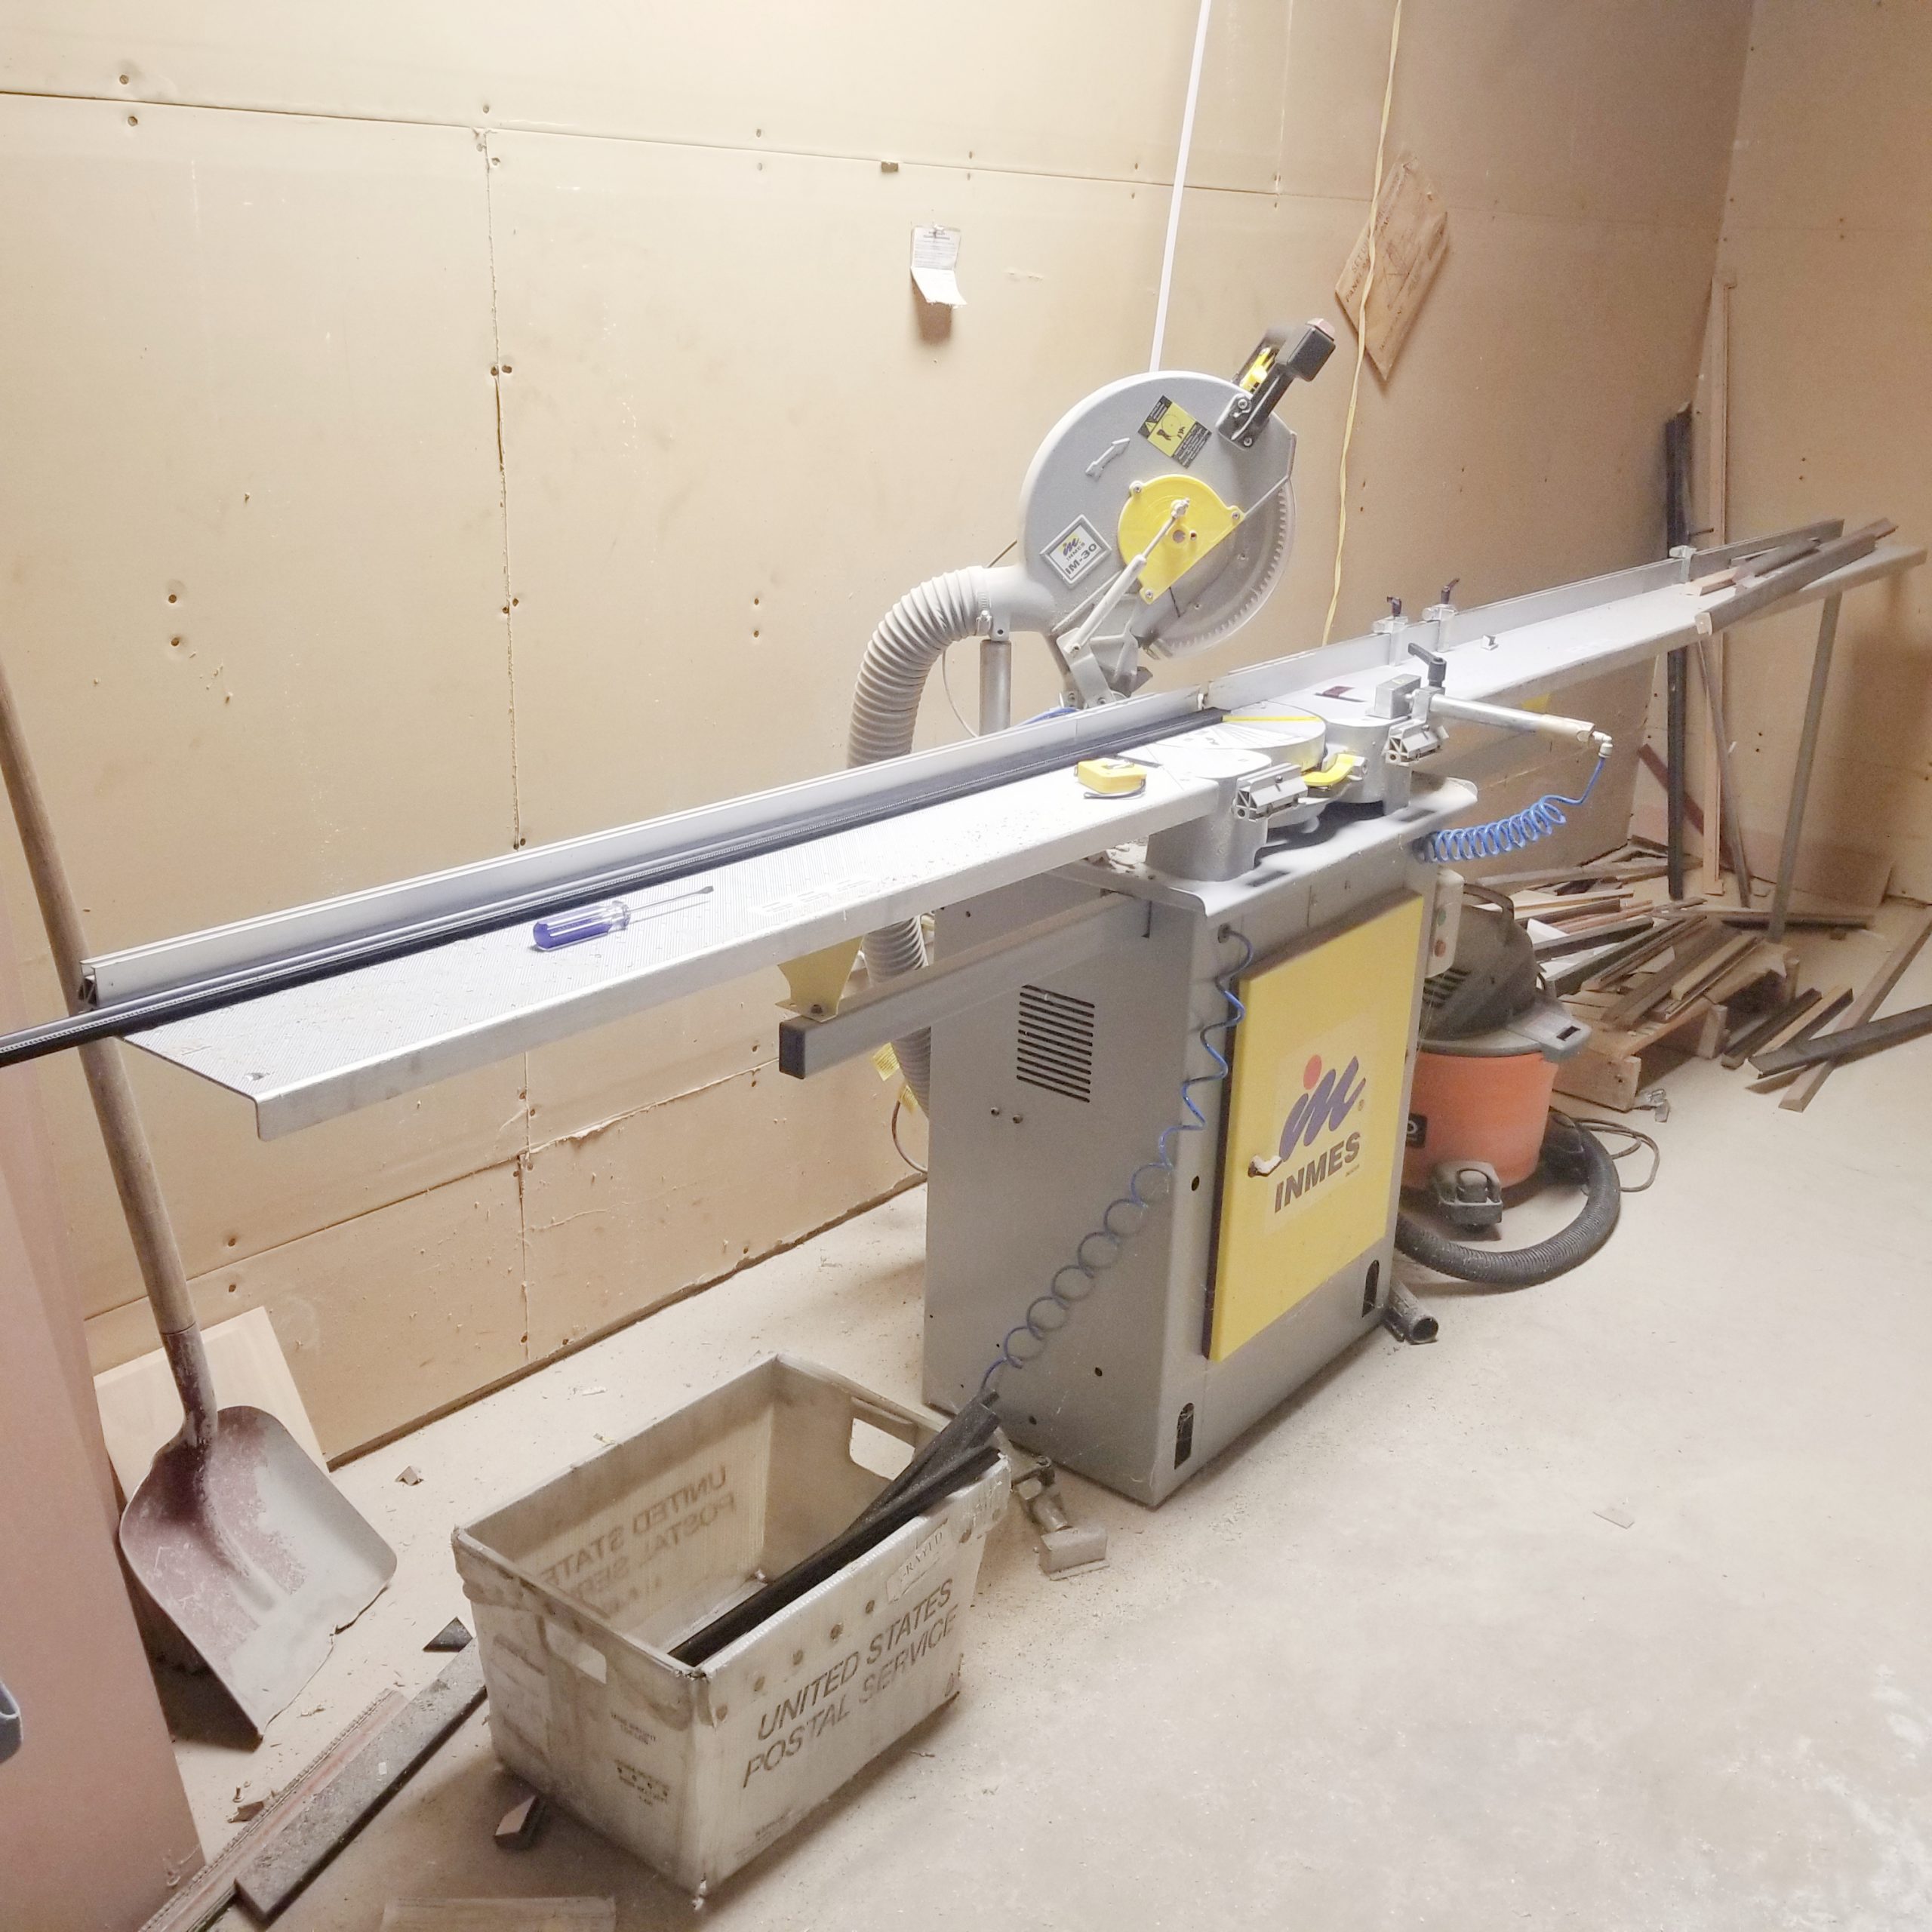 Equipment Lot: Cassese CS200 Underpinner, Inmes Saw, Esterly Cutter & Milwaukee 6410 Panel Saw (used) Item # UE-072121A (New Jersey)